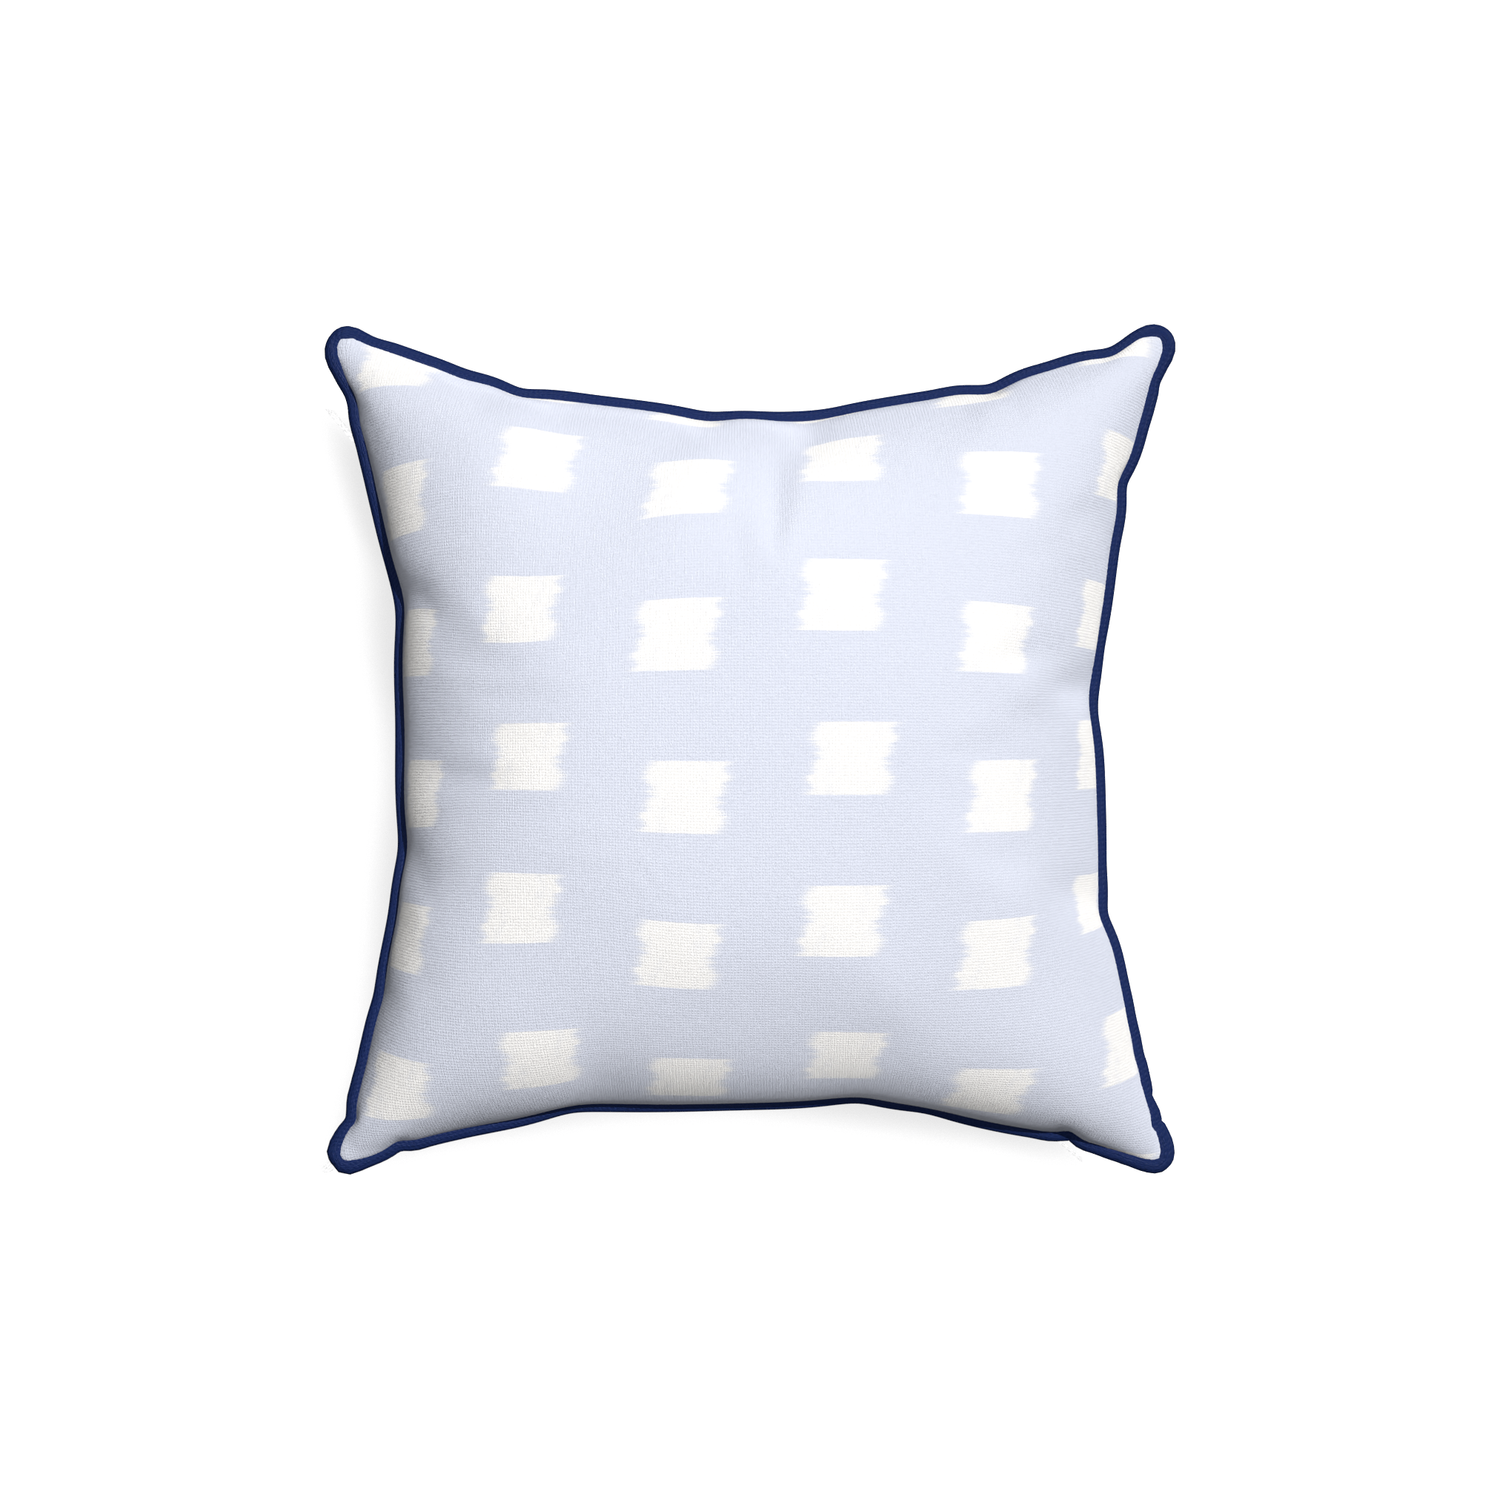 18-square denton custom sky blue patternpillow with midnight piping on white background